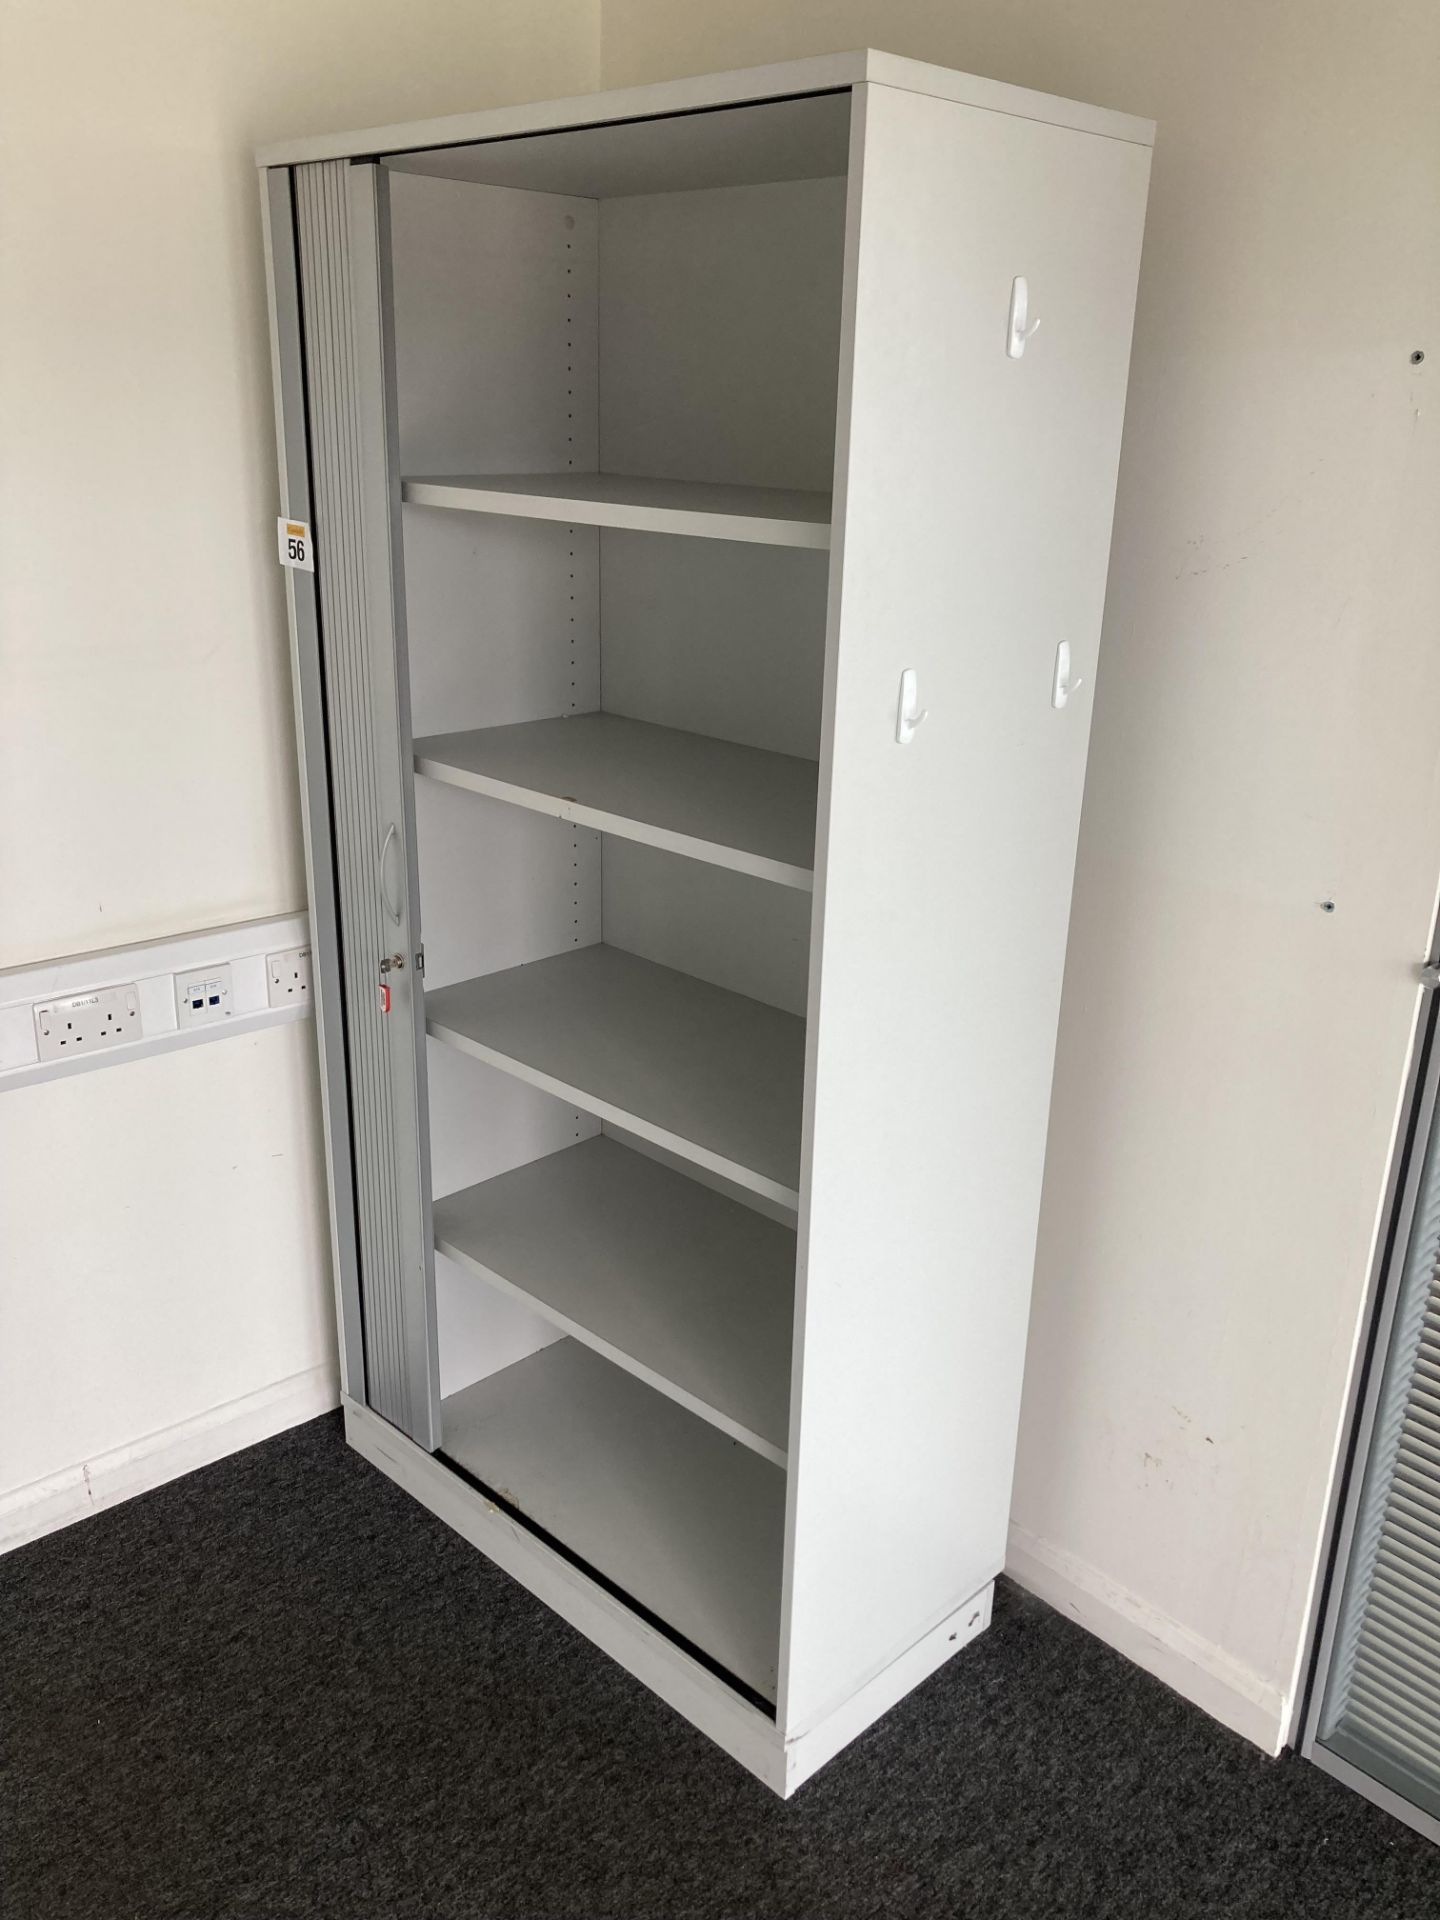 OFFICE CABINET WITH 4 SHELVES